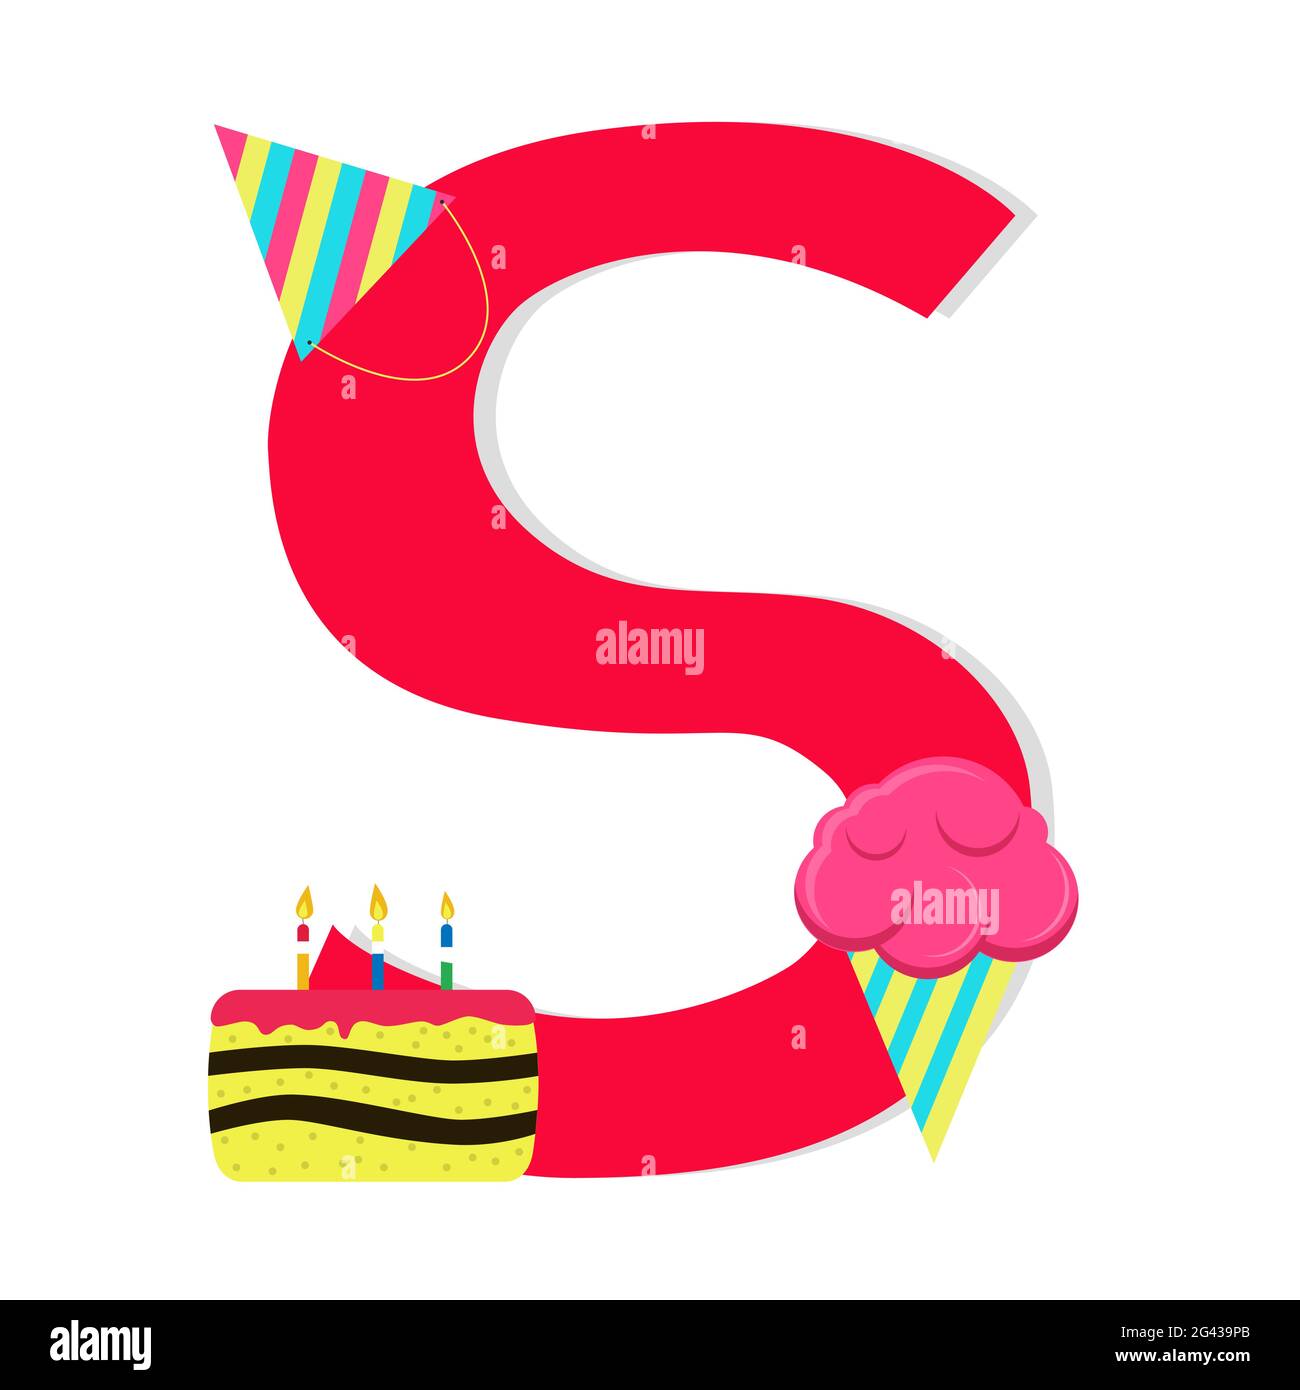 Letter 's' from stylized alphabet with candies: birthday har, birthday cake, ice cream. White background. Stock Vector